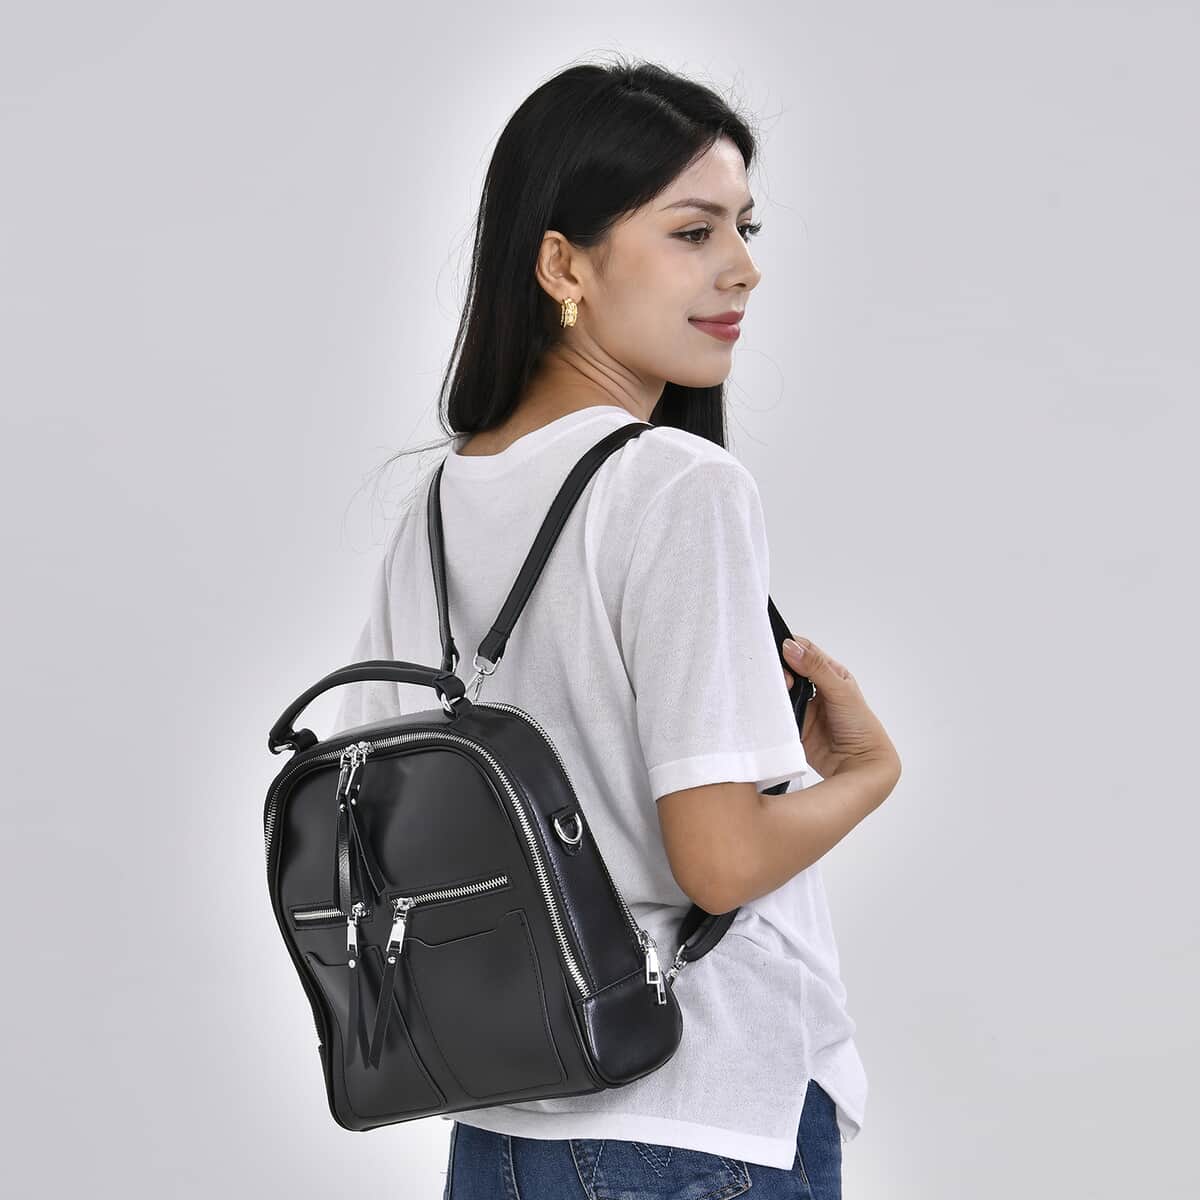 Black Genuine Leather Backpack (10.6"x3.1"x9.84") with Crossbody Strap image number 1